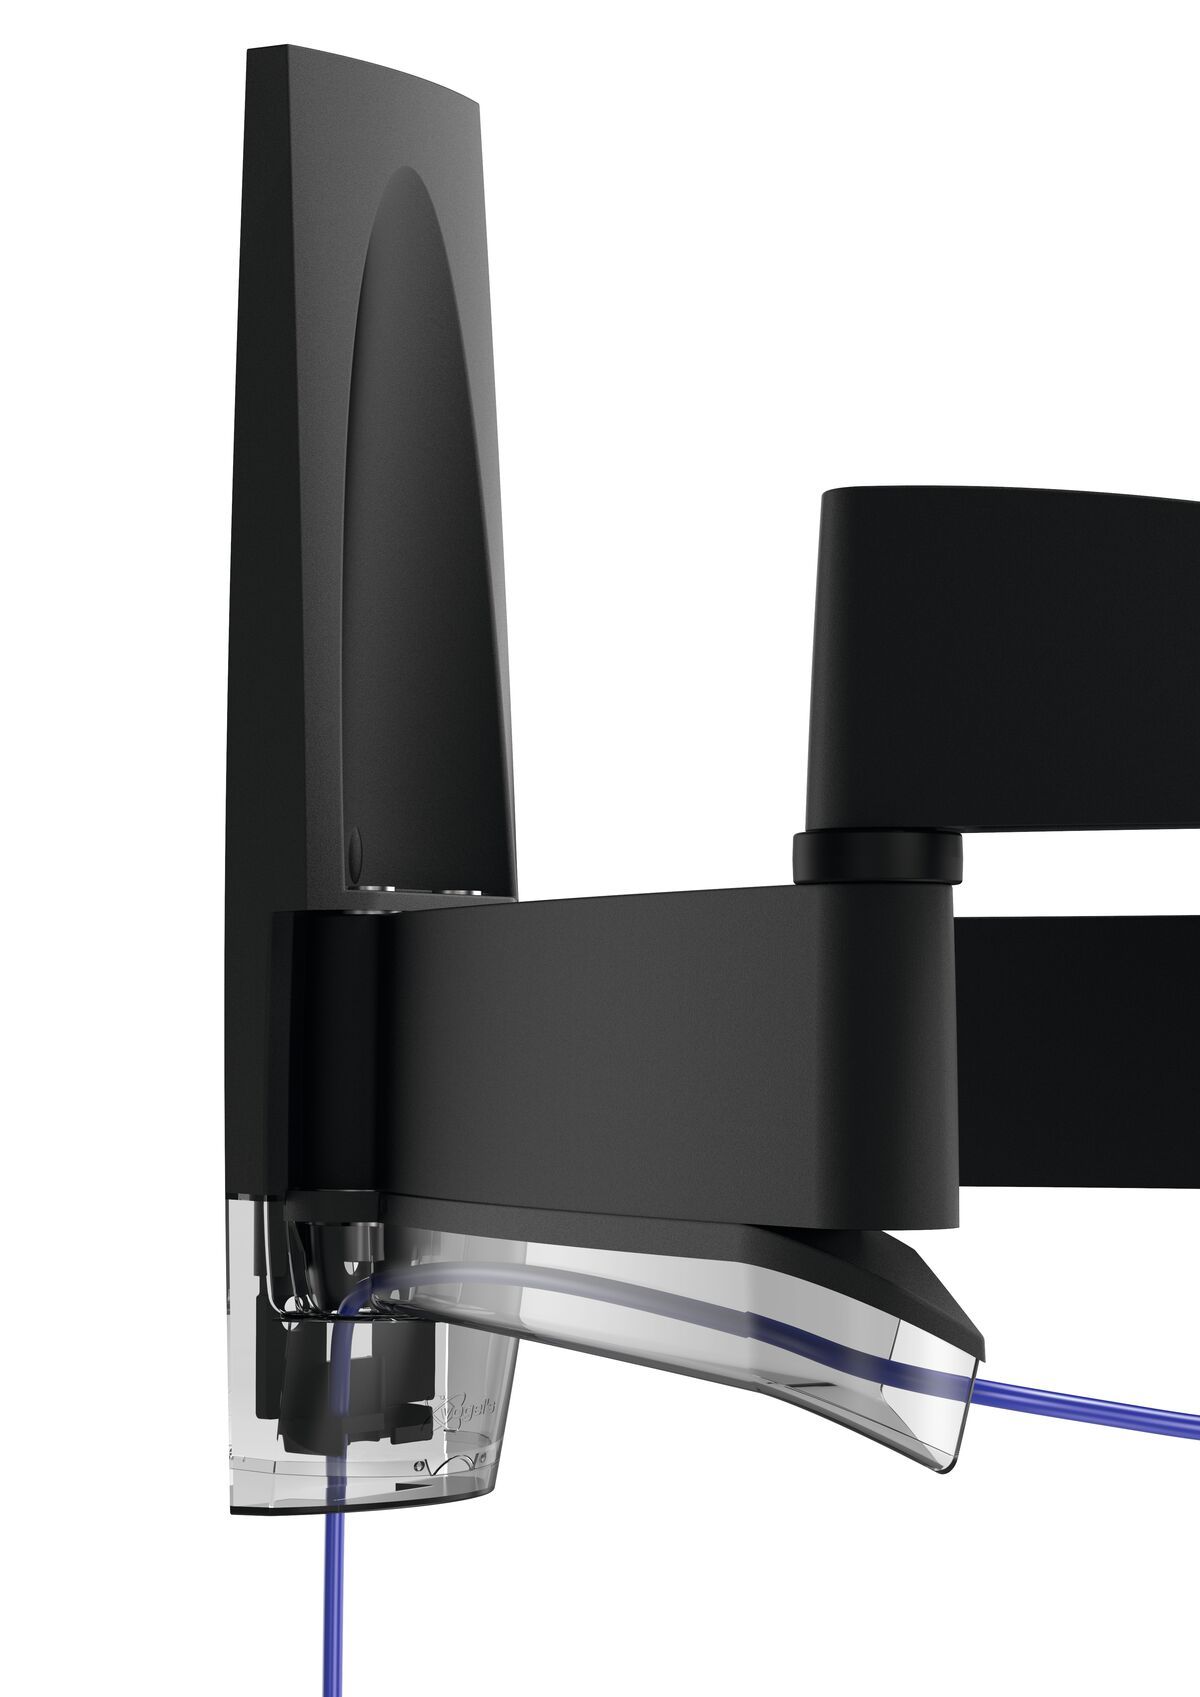 Vogel's WALL 2350 Full-Motion TV Wall Mount - Suitable for 40 up to 65 inch TVs - Motion (up to 120°) - Tilt up to 15° - Detail